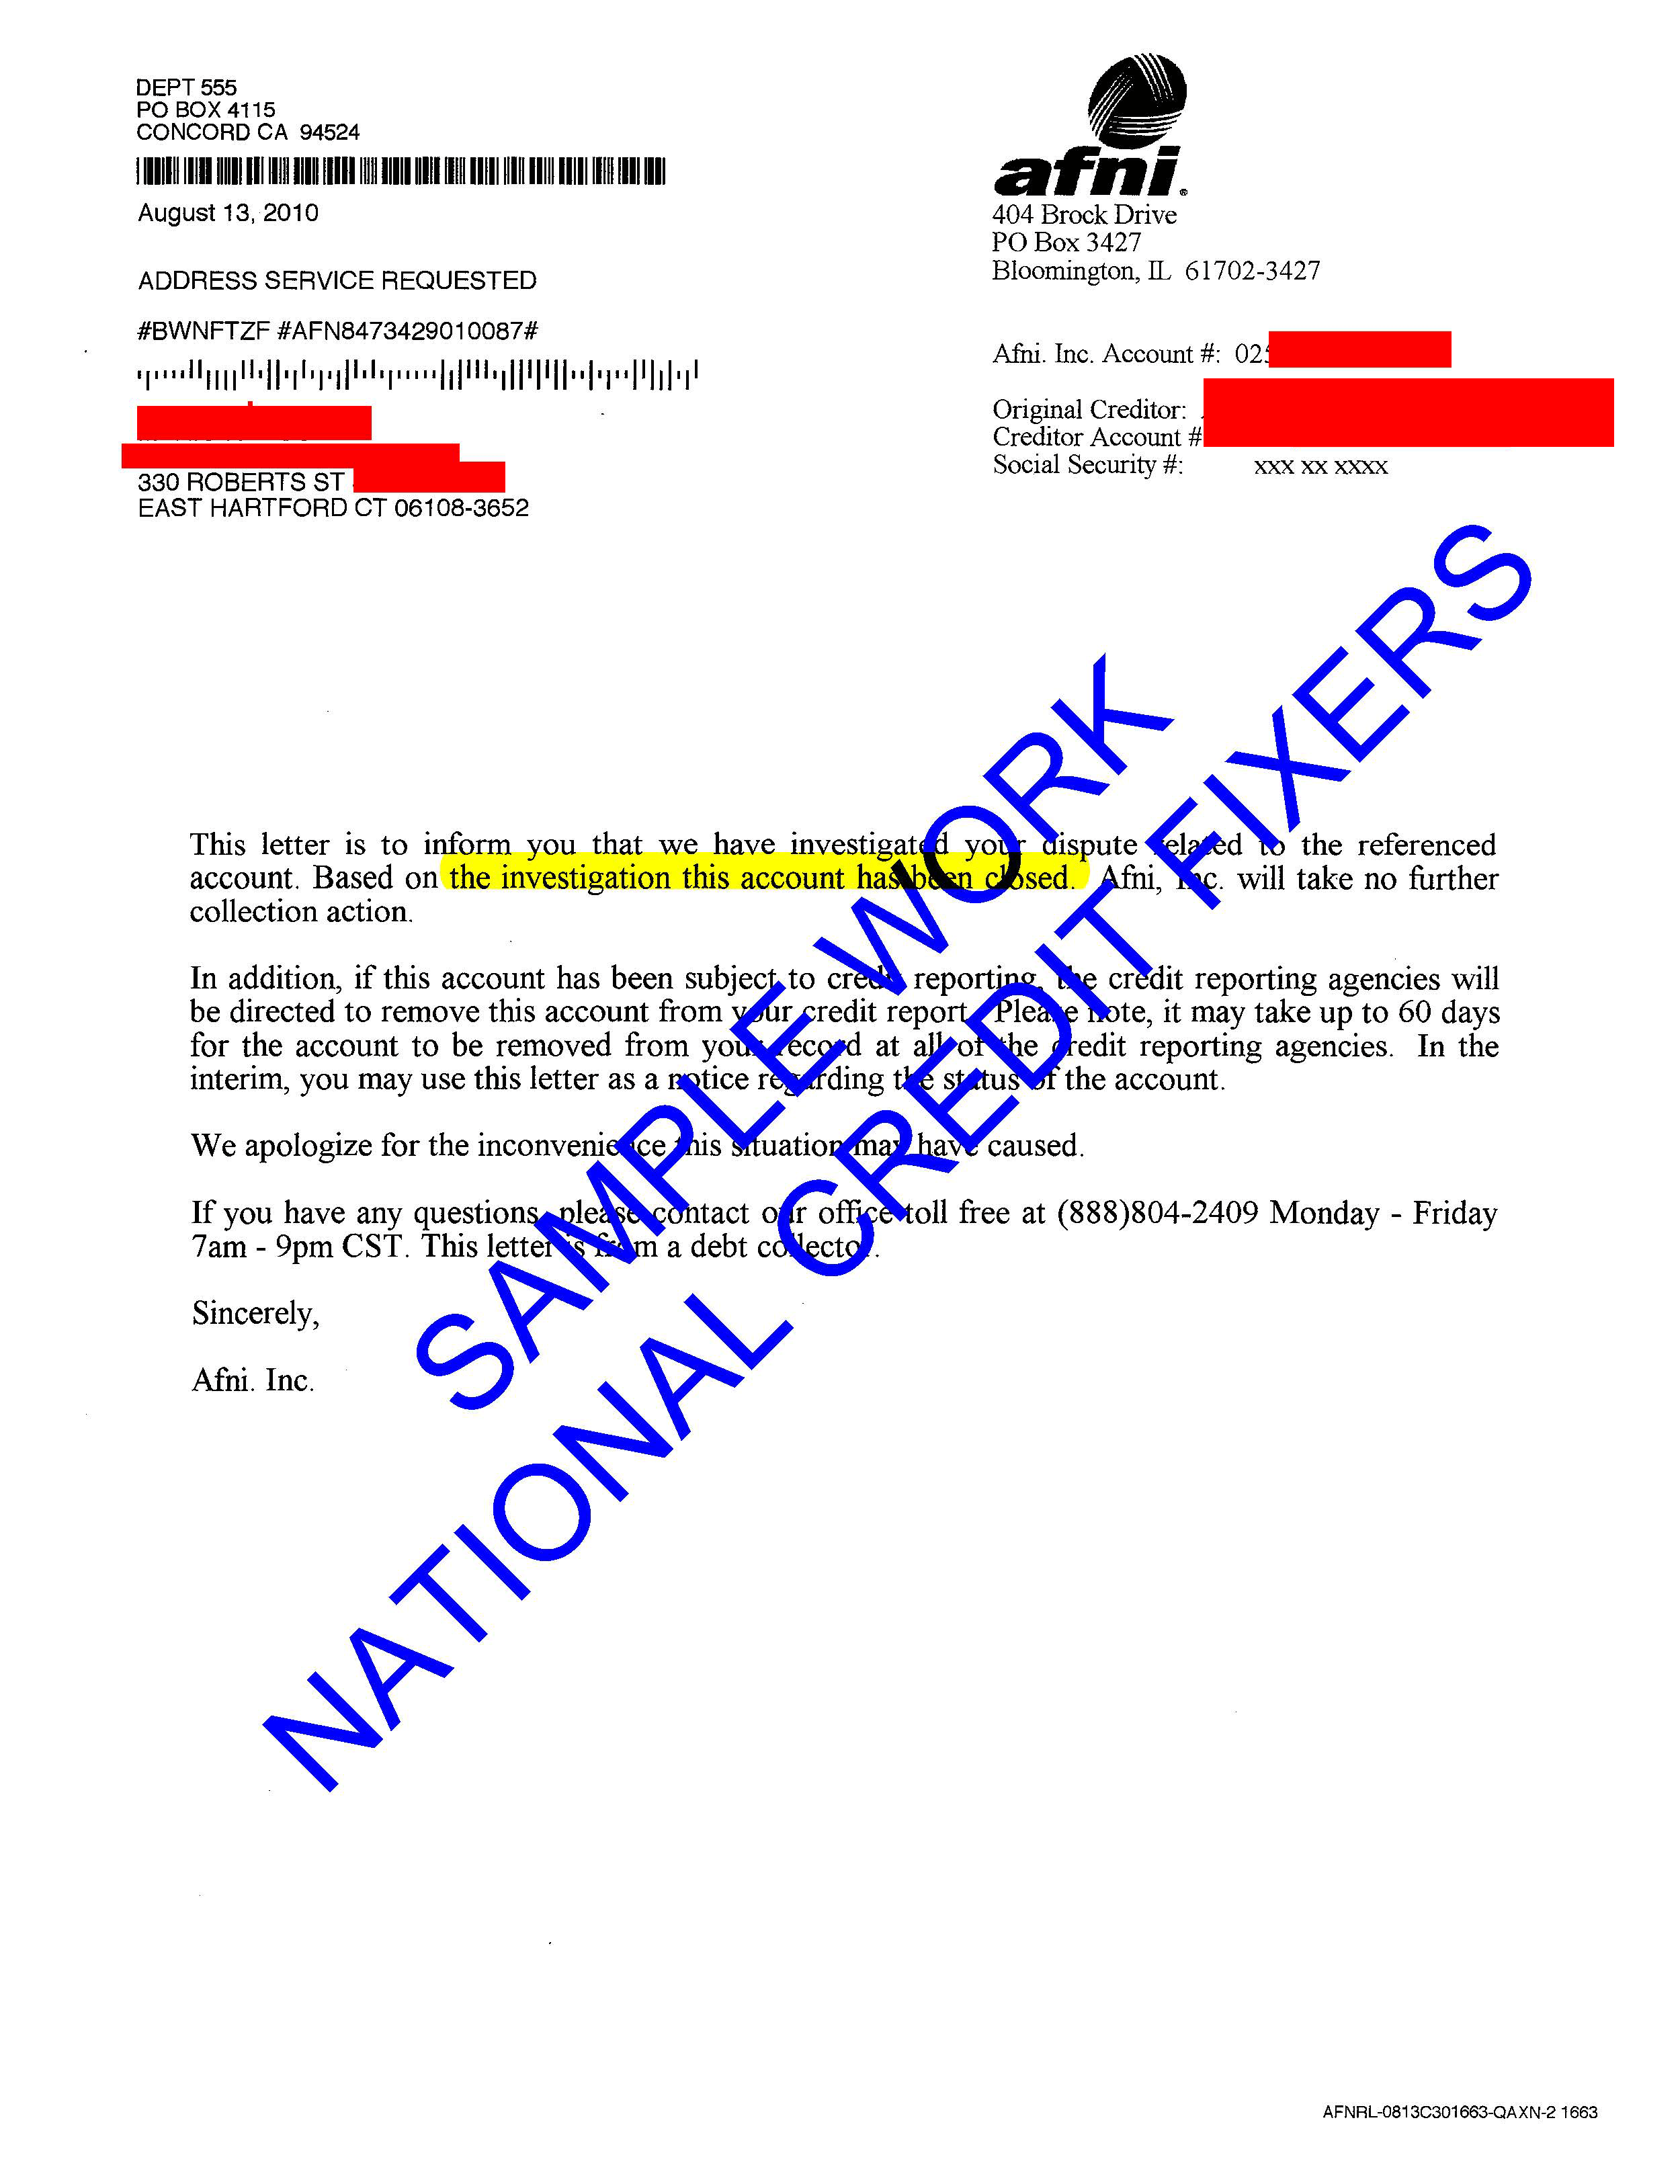 Anderson Financial Network Deletion Letter 2